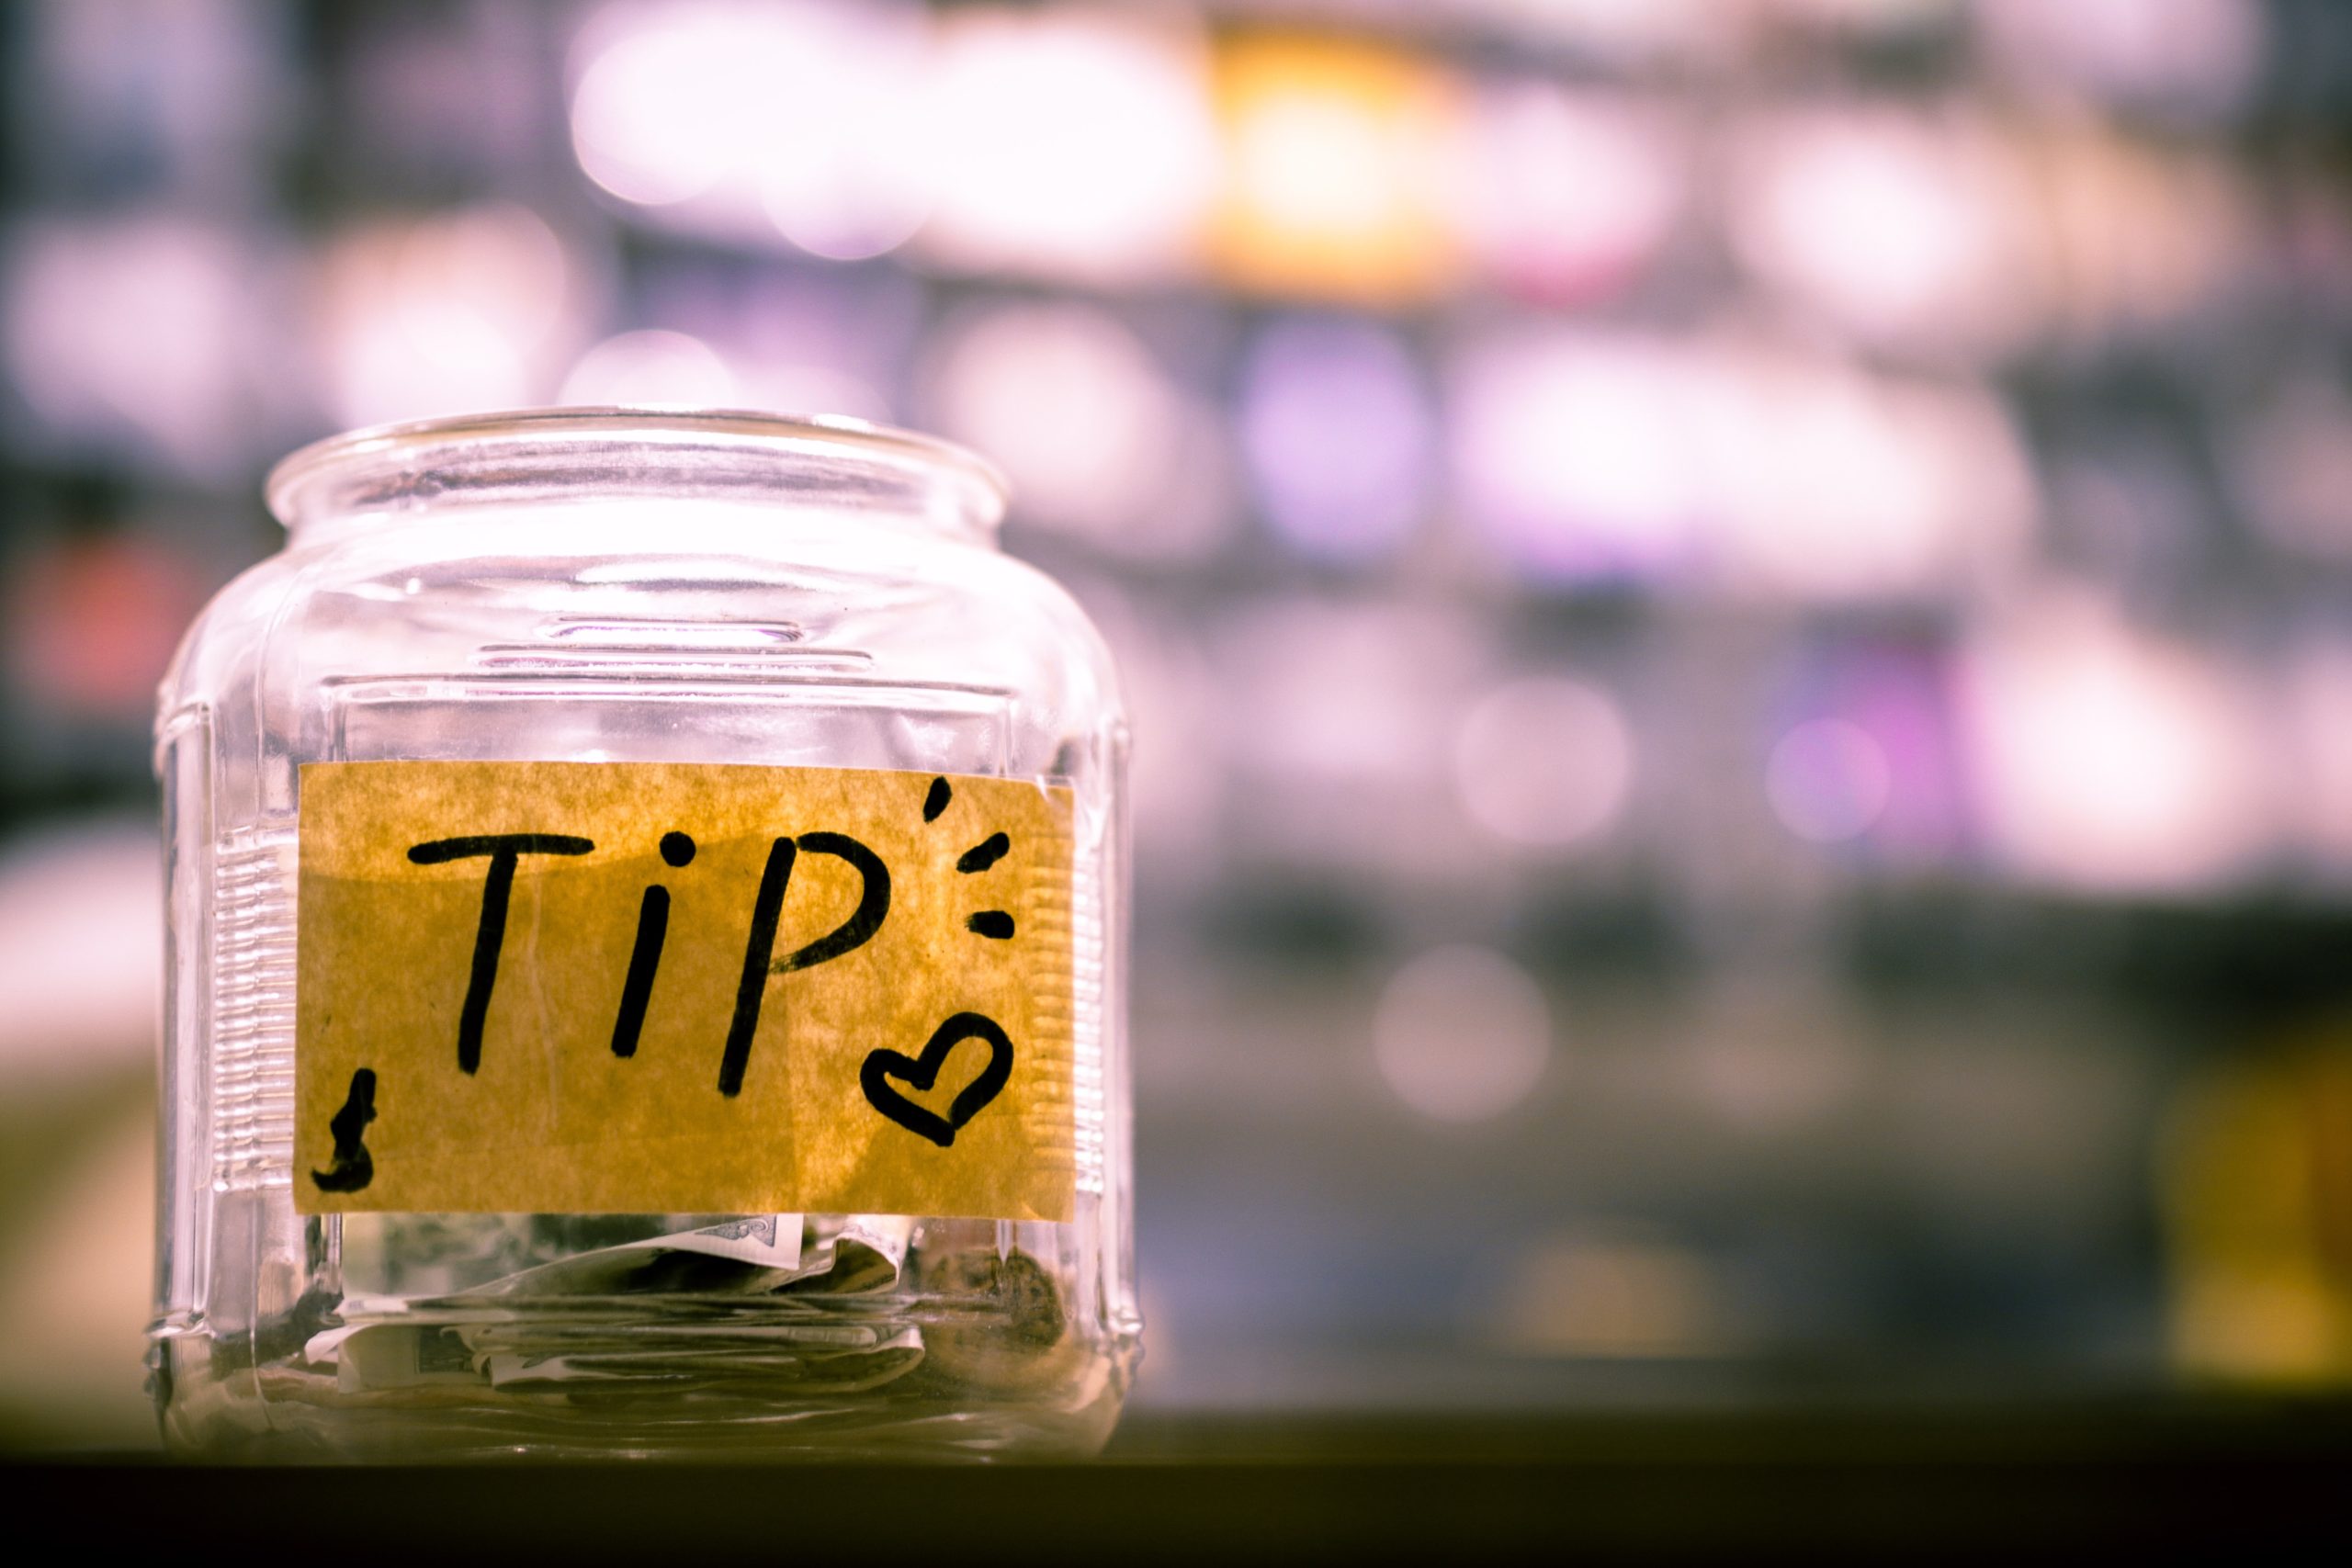 A tip jar sits on the counter of an illuminated bar